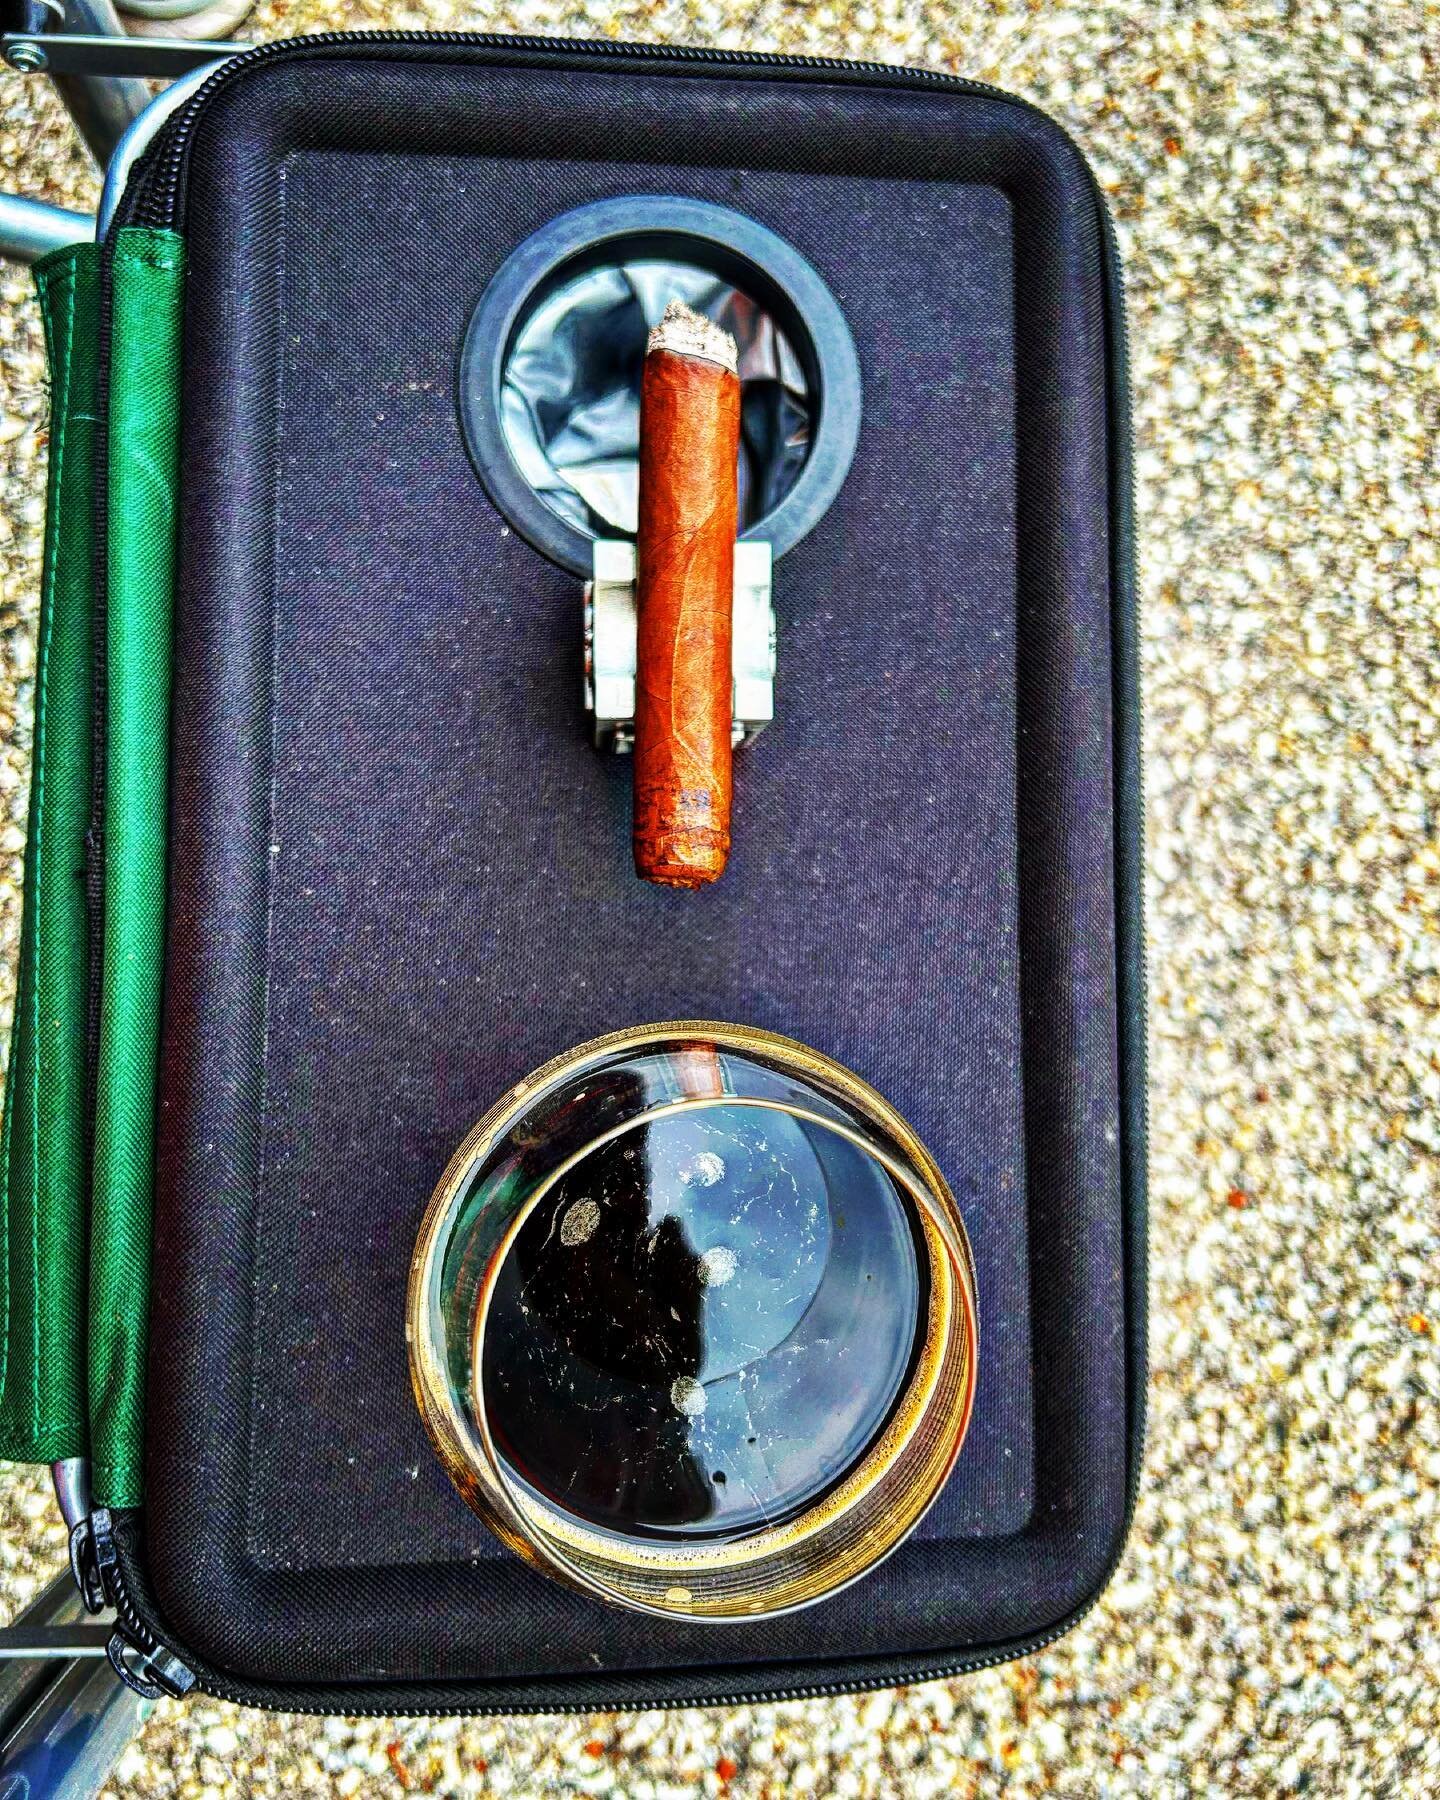 Great day for a smoke! Hope you&rsquo;re enjoying your Sunday. Cheers!!